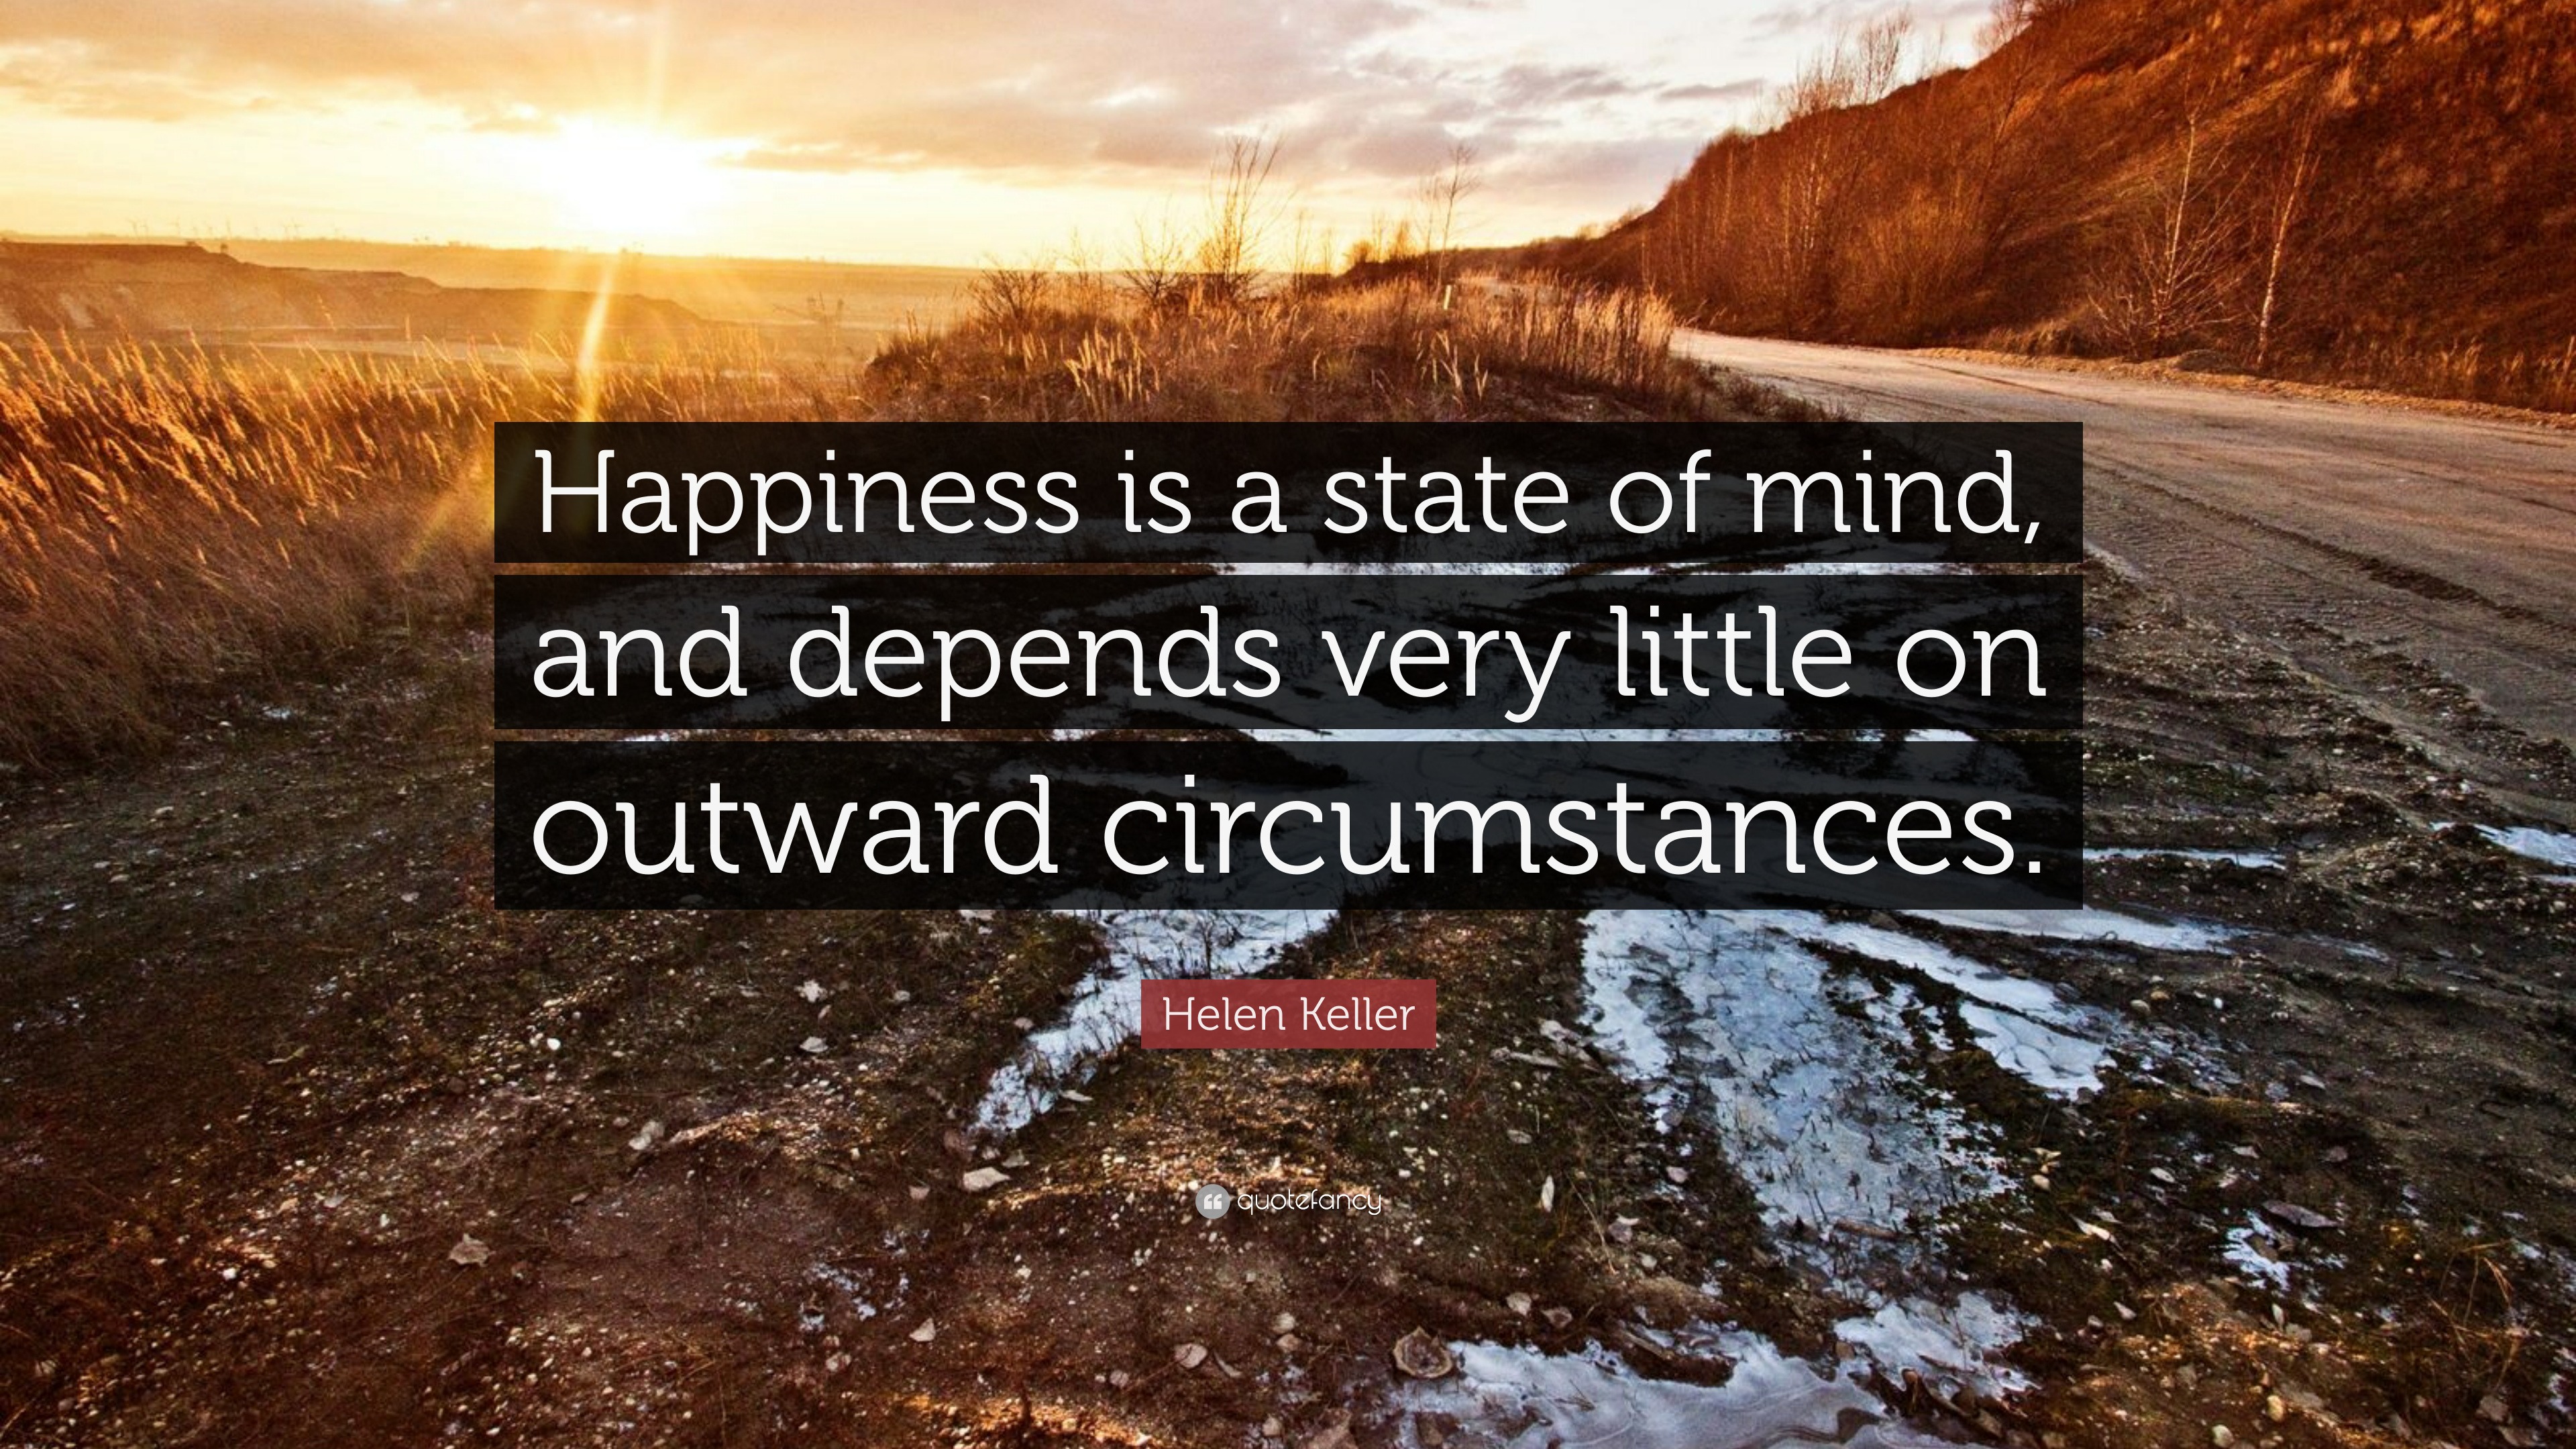 Helen Keller Quote: “Happiness is a state of mind, and depends very